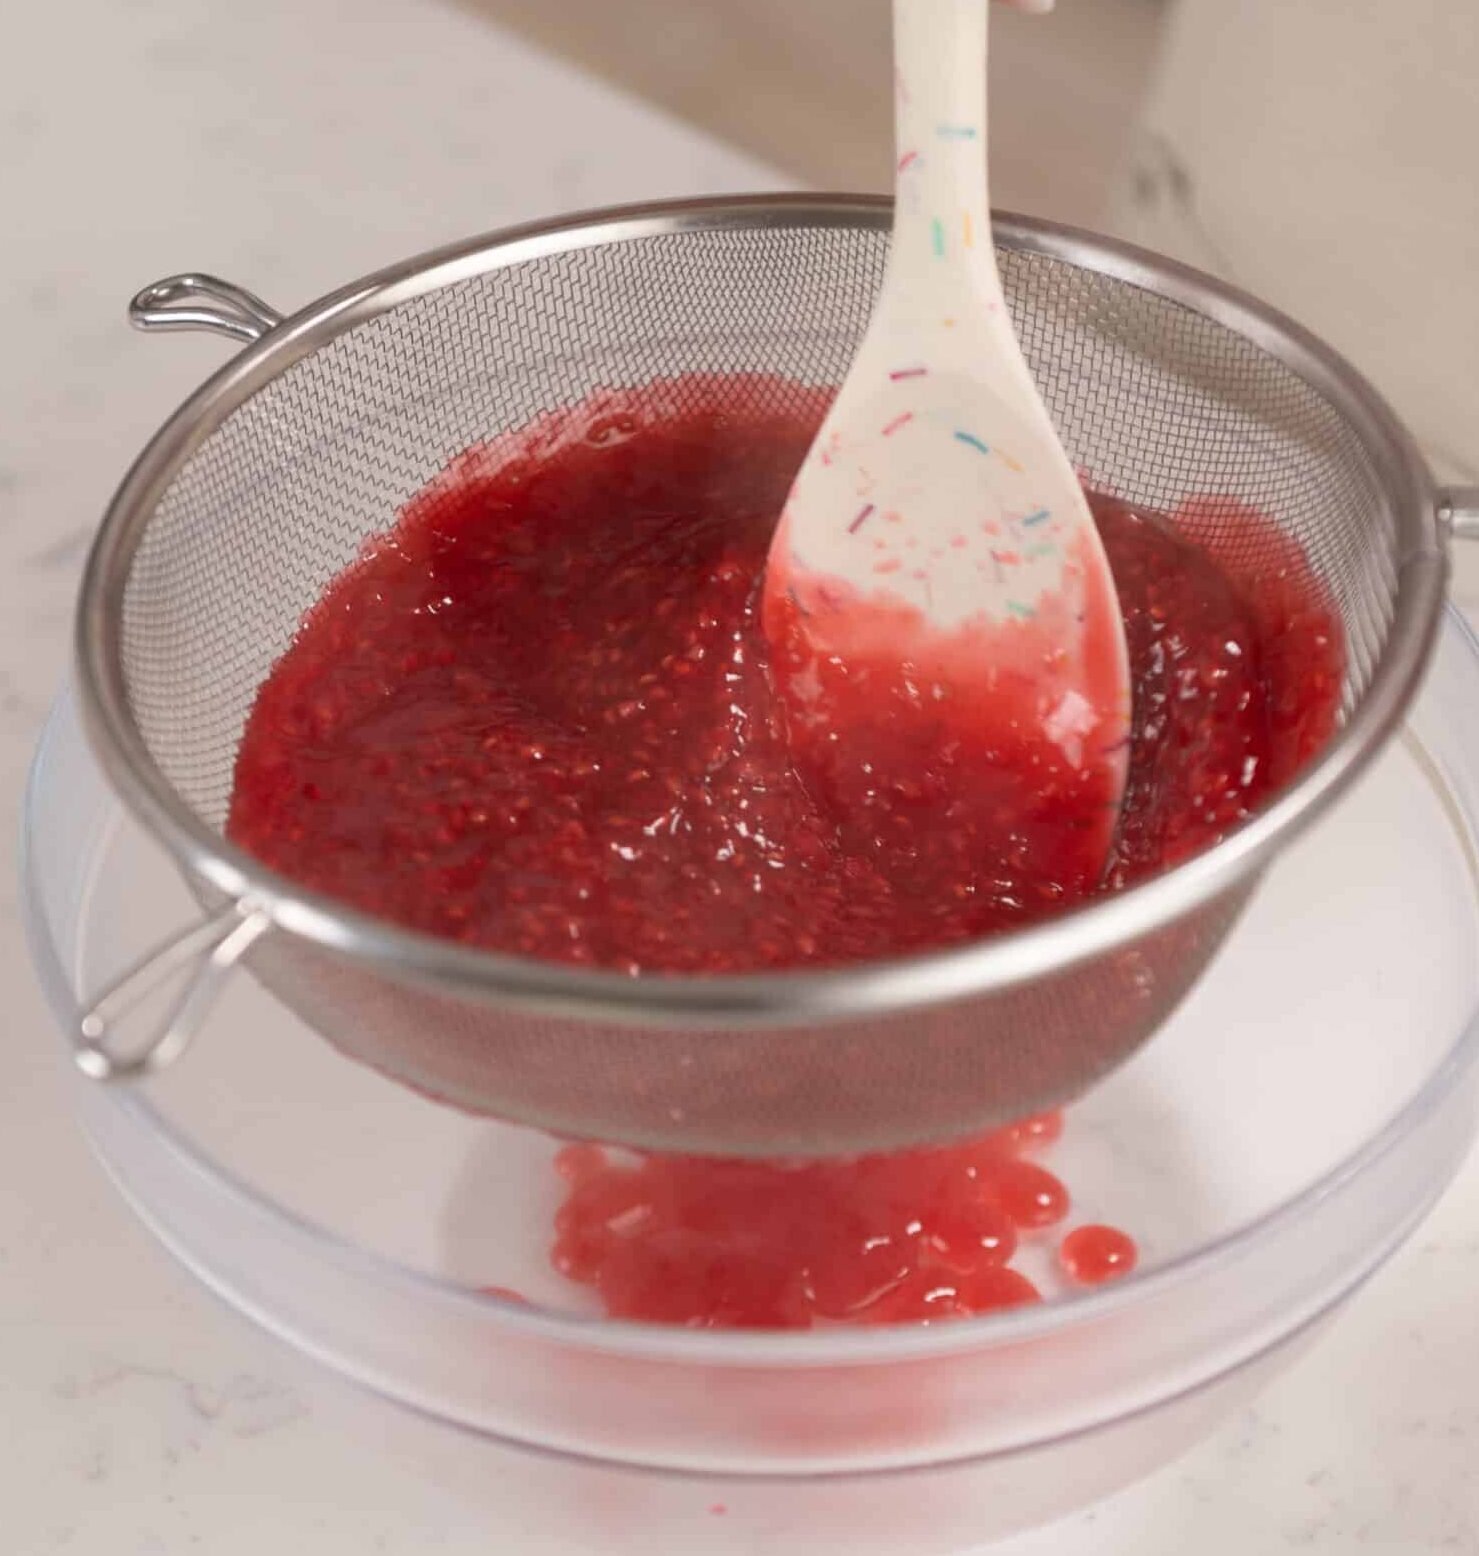 raspberry filling being strained into a bowl to remove the seeds